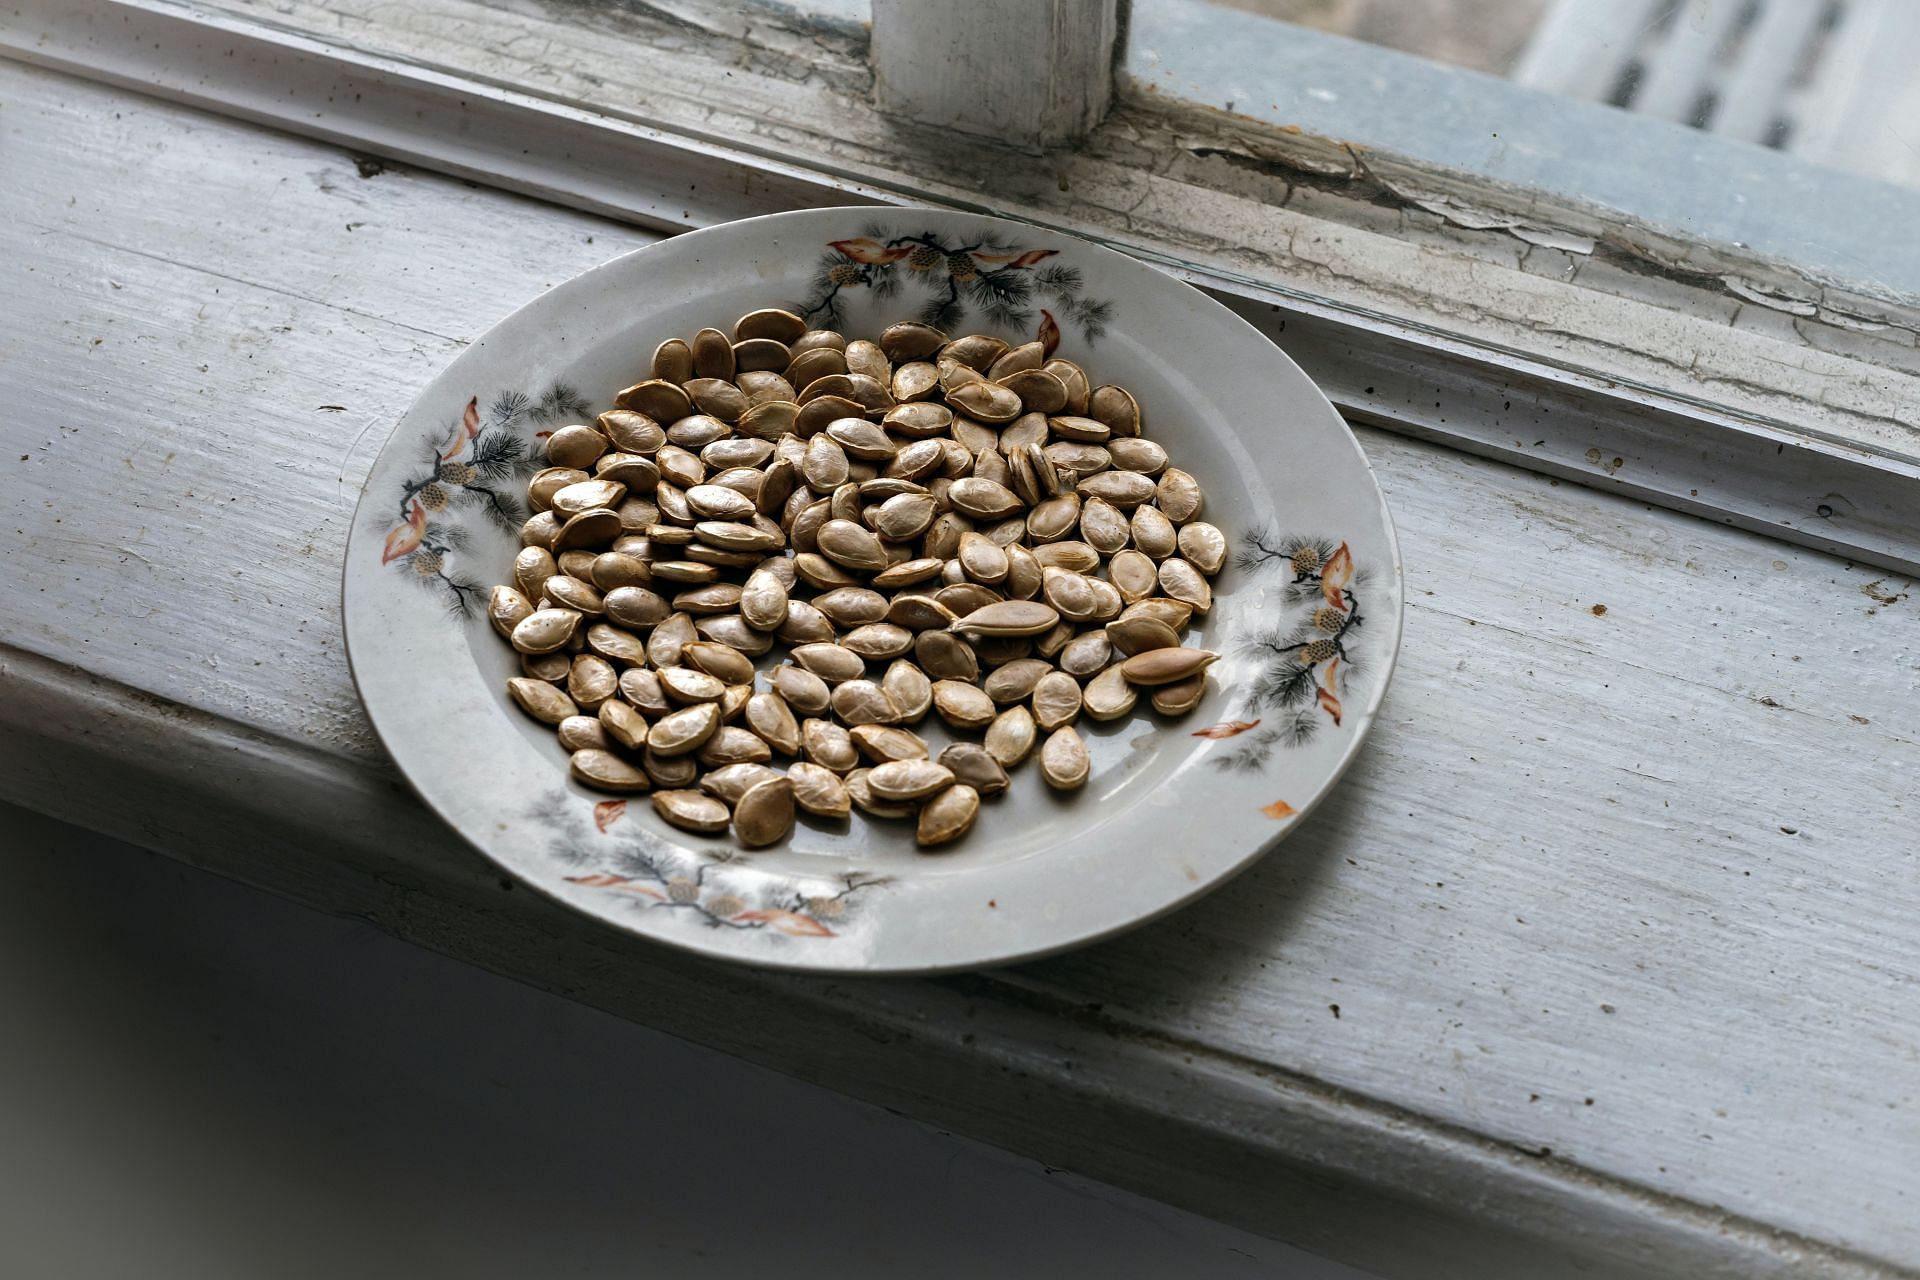 Be mindful of the amount of pumpkin seeds, as these can cause weight gain. (Image via Pexels/Rasa Kasparaviciene)